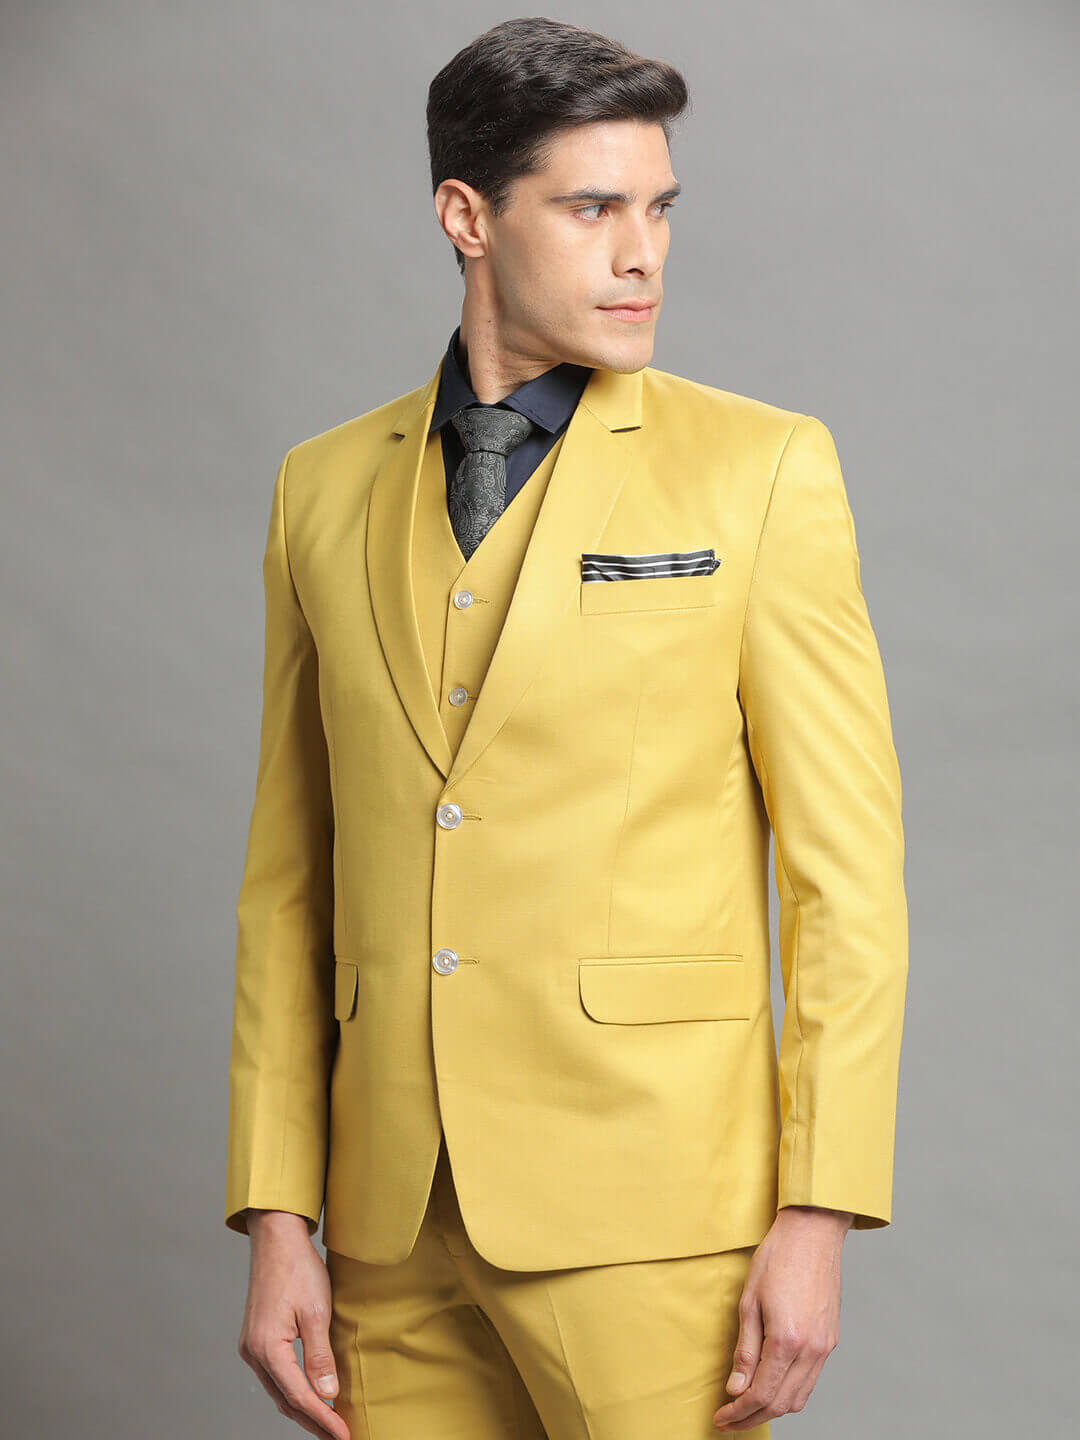 displaying image of Yellow 3 Piece Suit